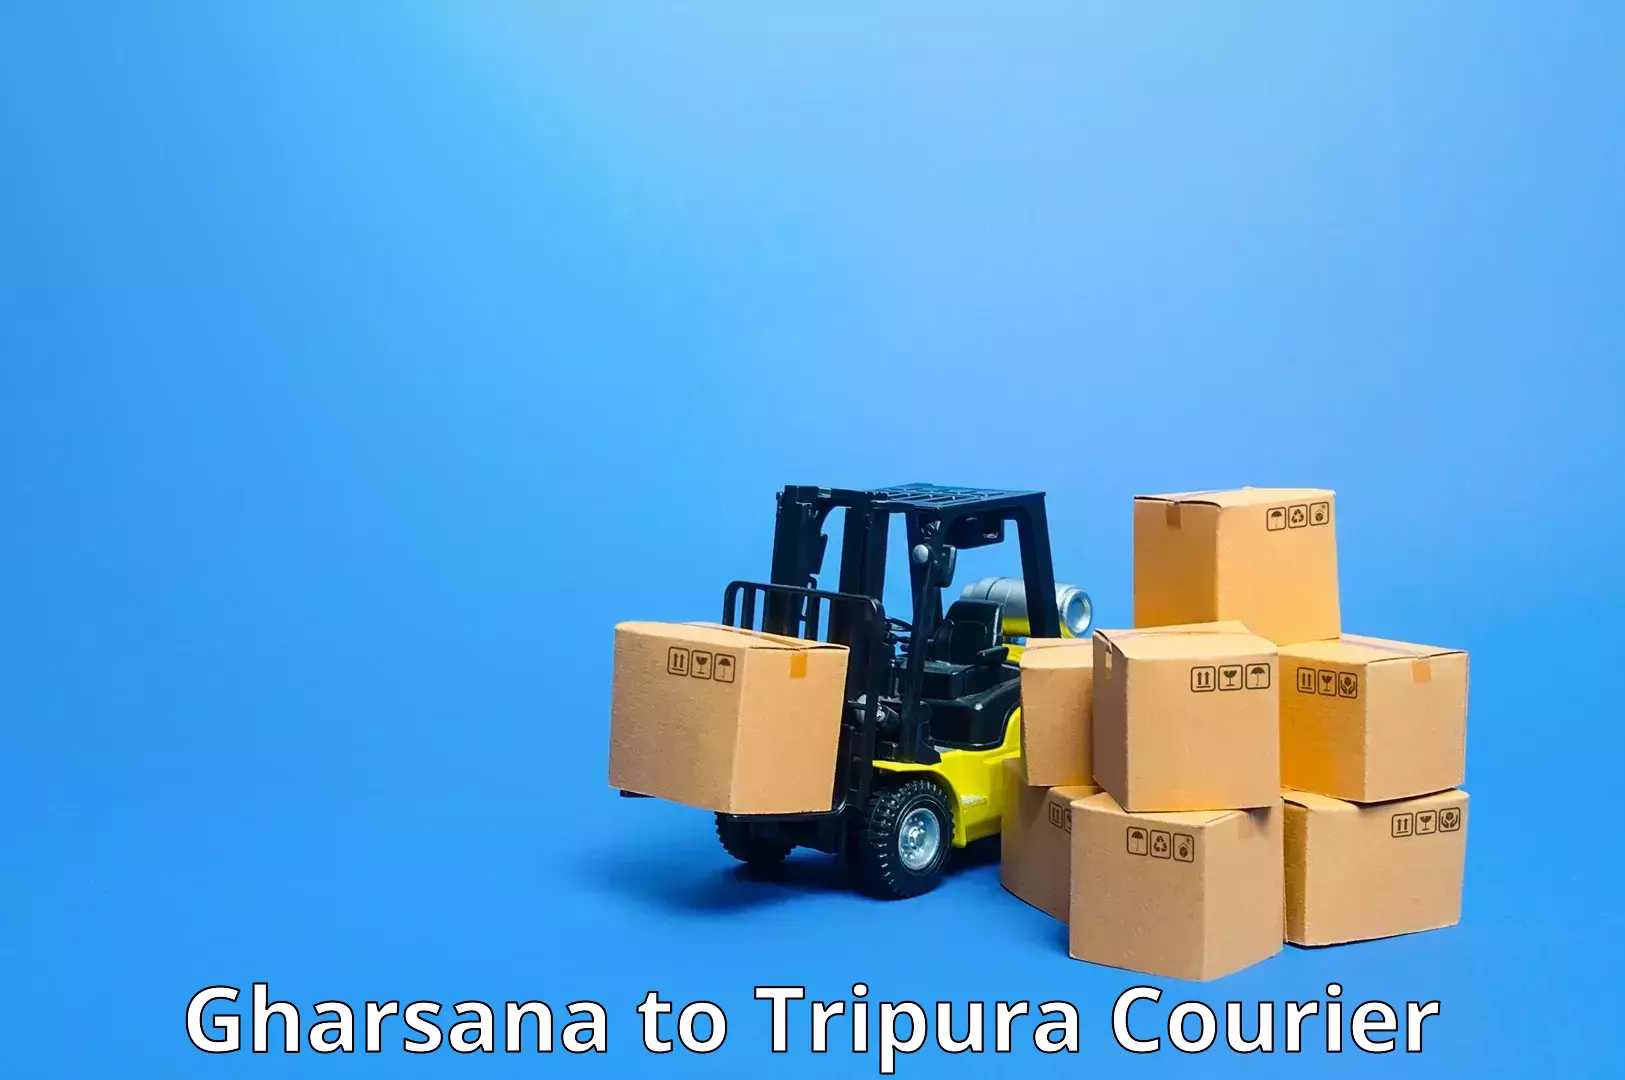 Flexible delivery schedules Gharsana to Dharmanagar